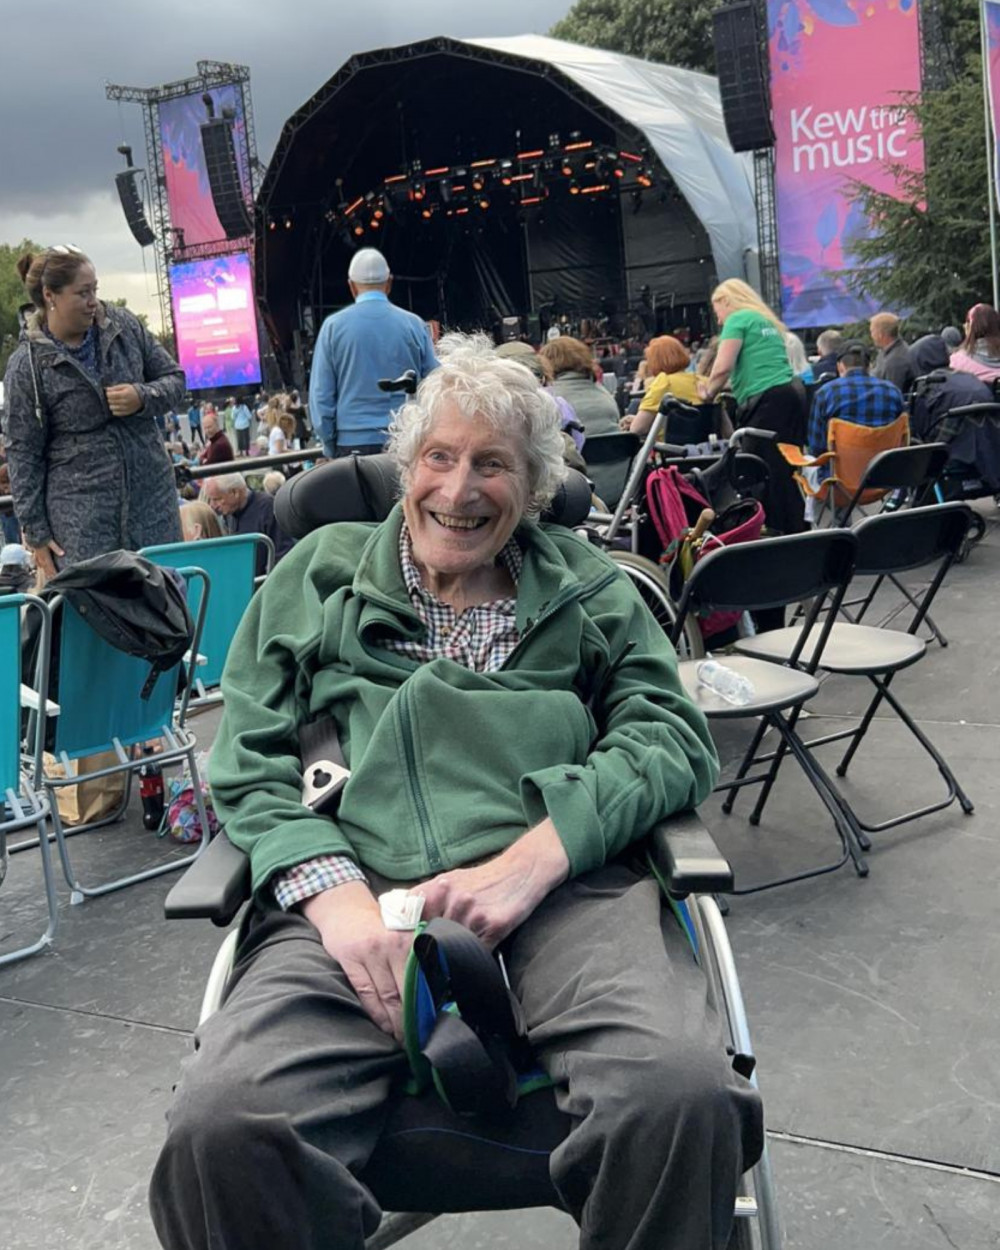 A local home care company supported three customers to attend Kew the Music, held in the Royal Botanic Gardens.